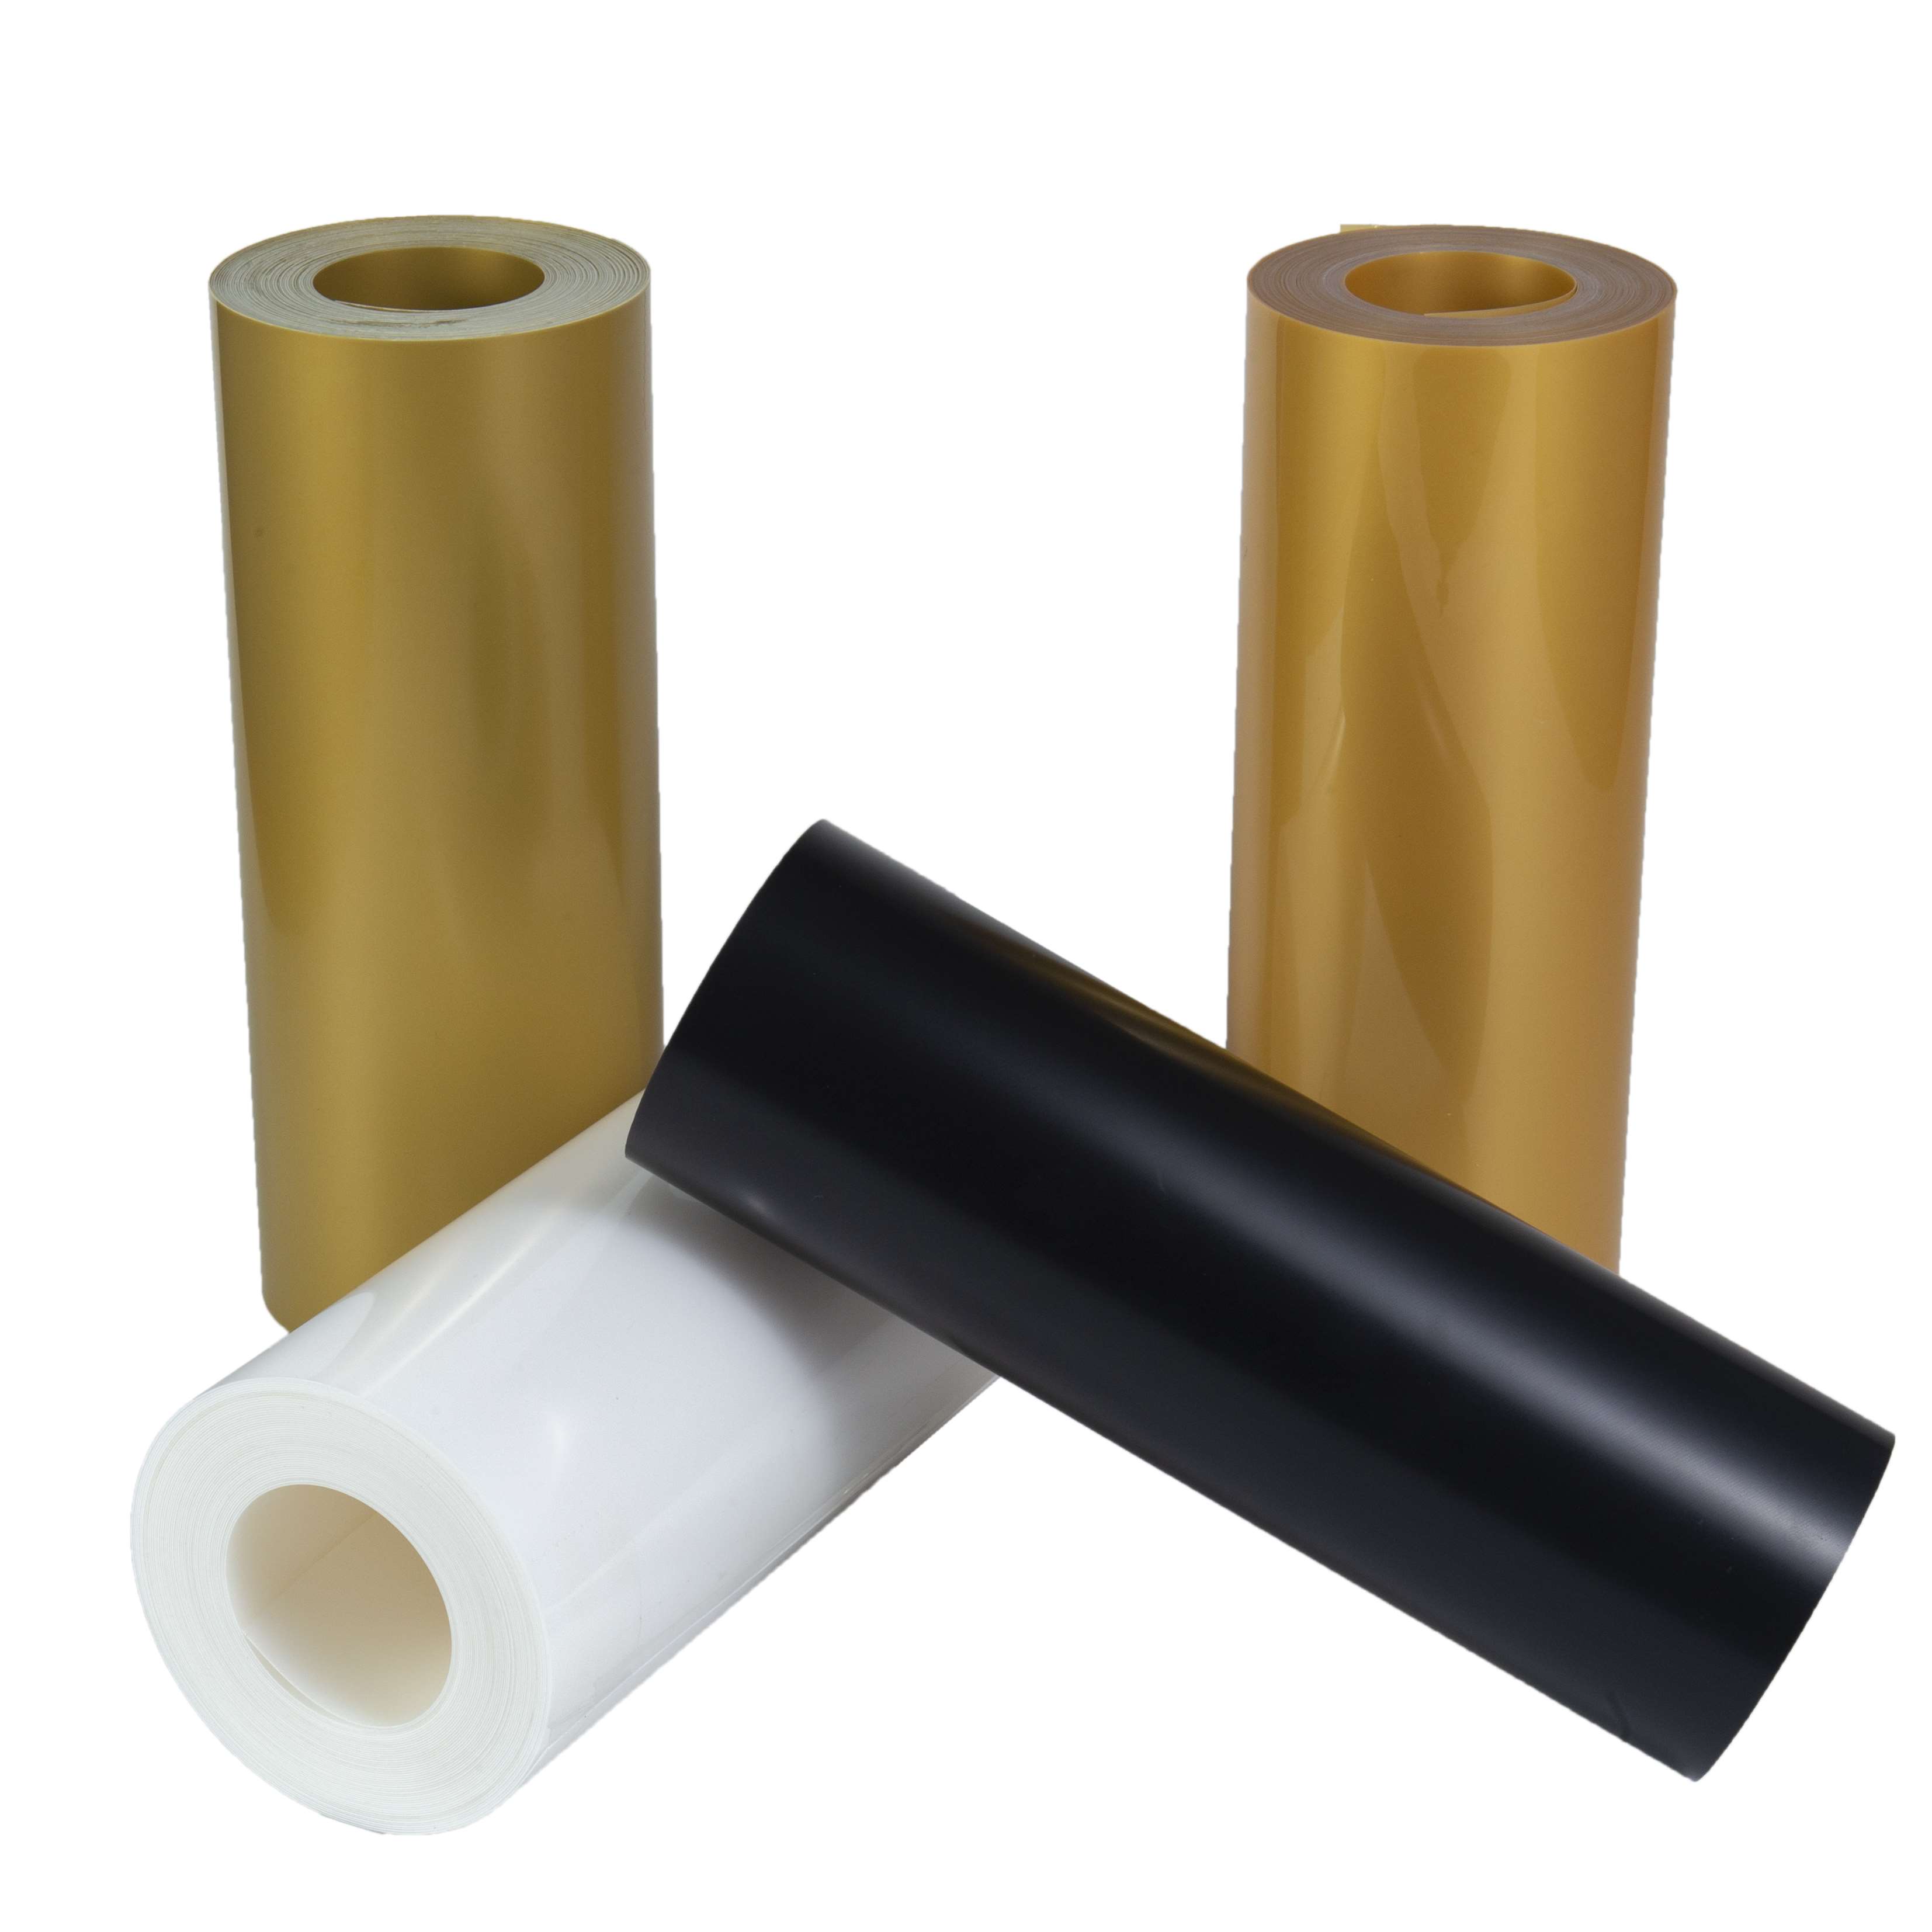  China manufacturer conductive polypropylene pp plastic sheet 0.2mm in roll-1